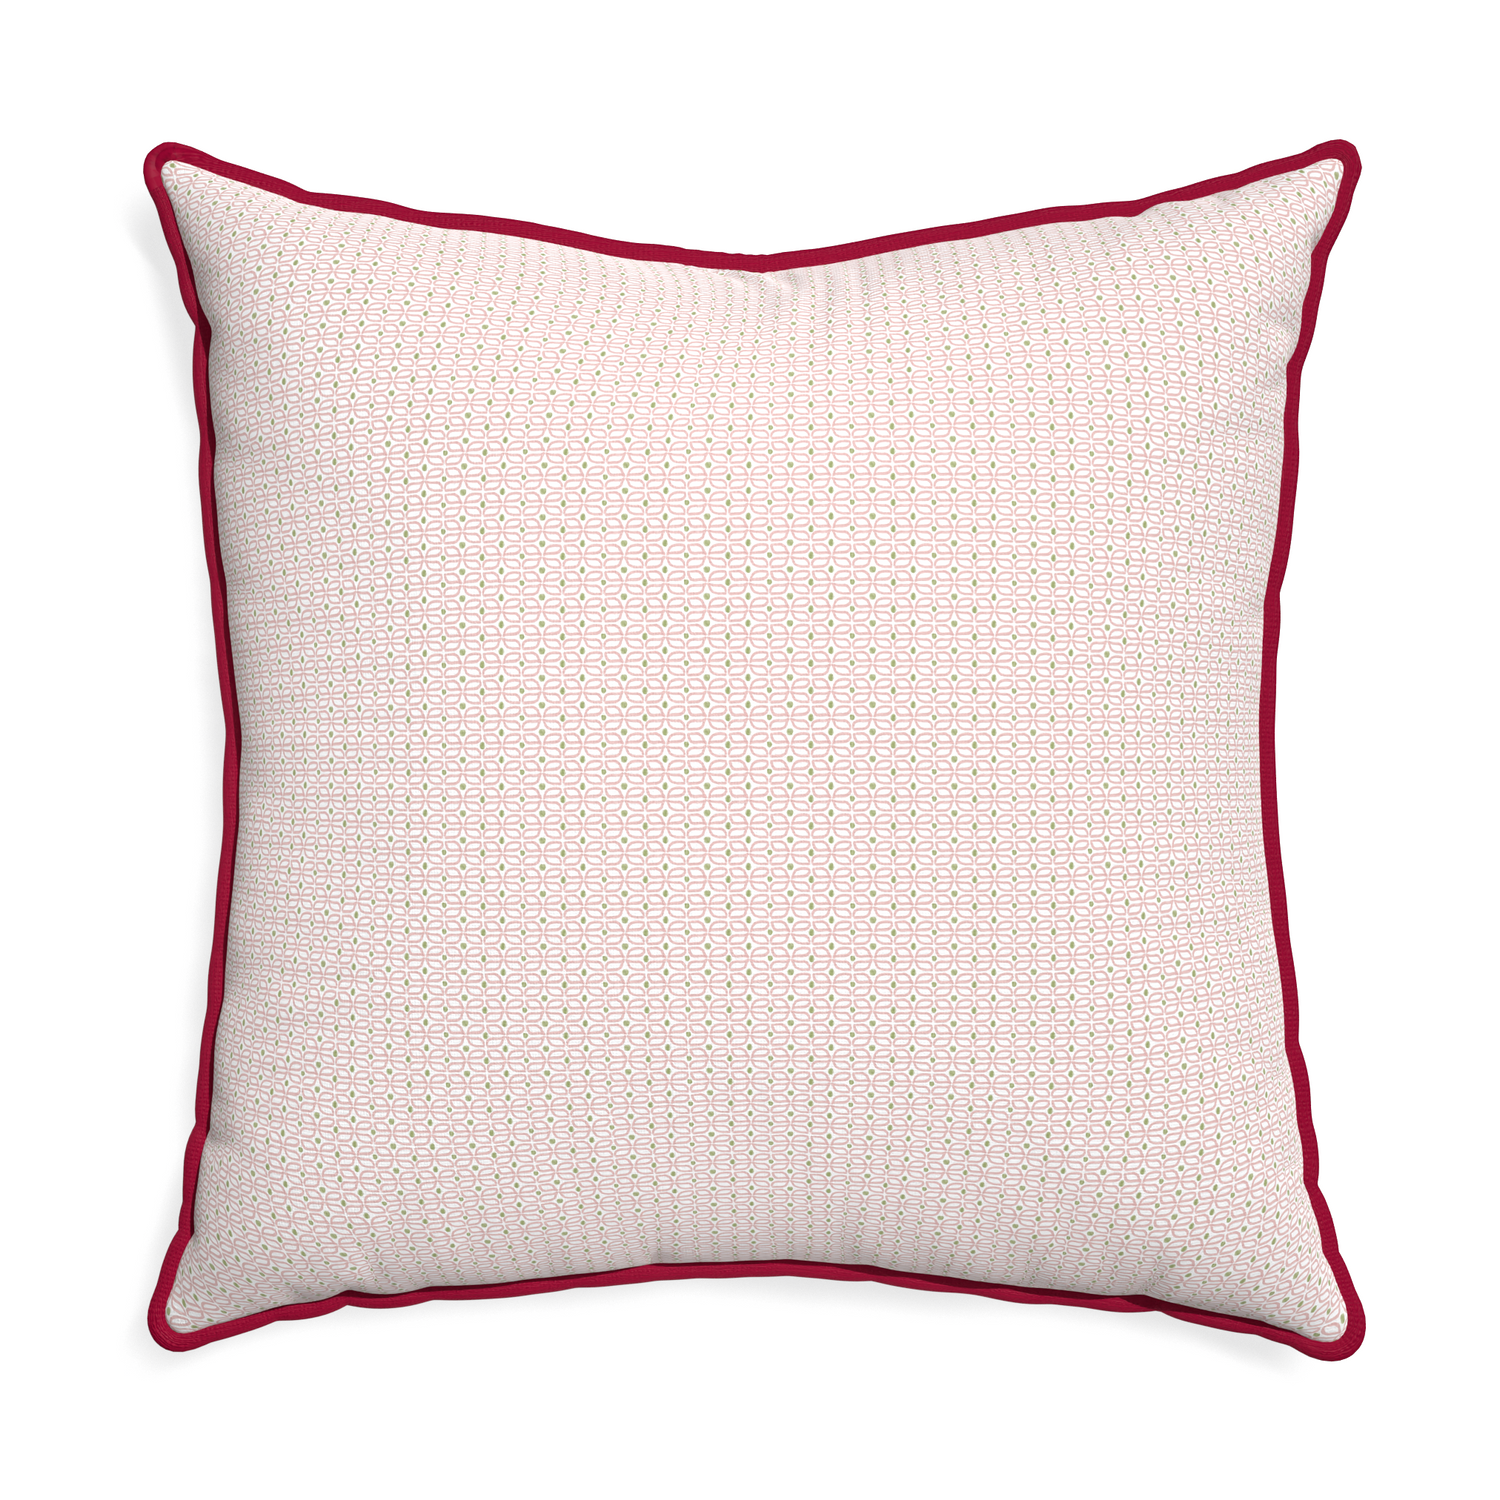 Euro-sham loomi pink custom pillow with raspberry piping on white background